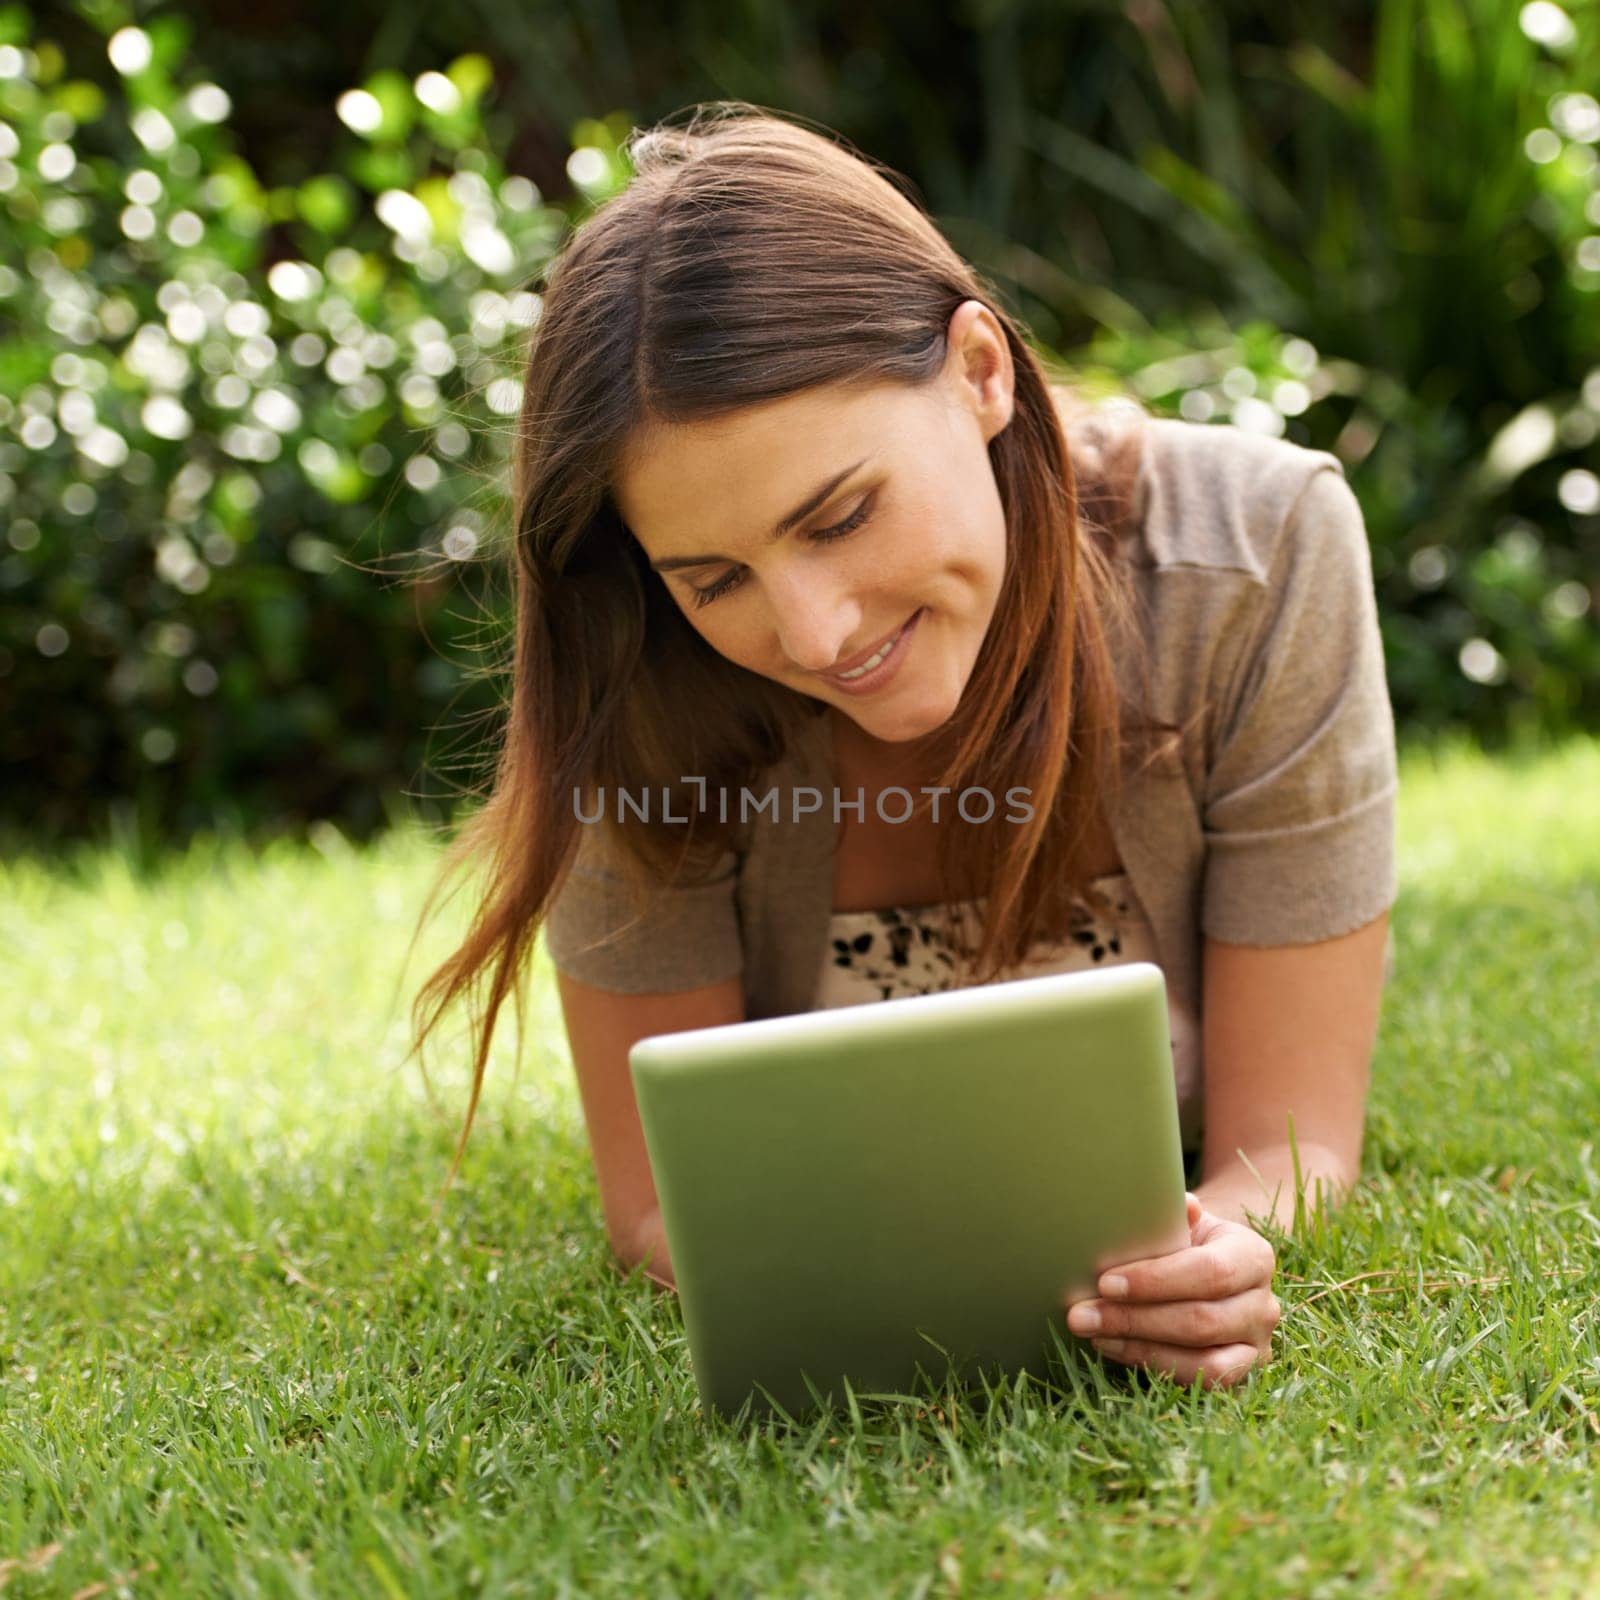 Tablet, smile and woman outdoor on grass, nature and garden for communication, technology and internet. Happy female person, backyard and digital pad for social media, connectivity and browsing.